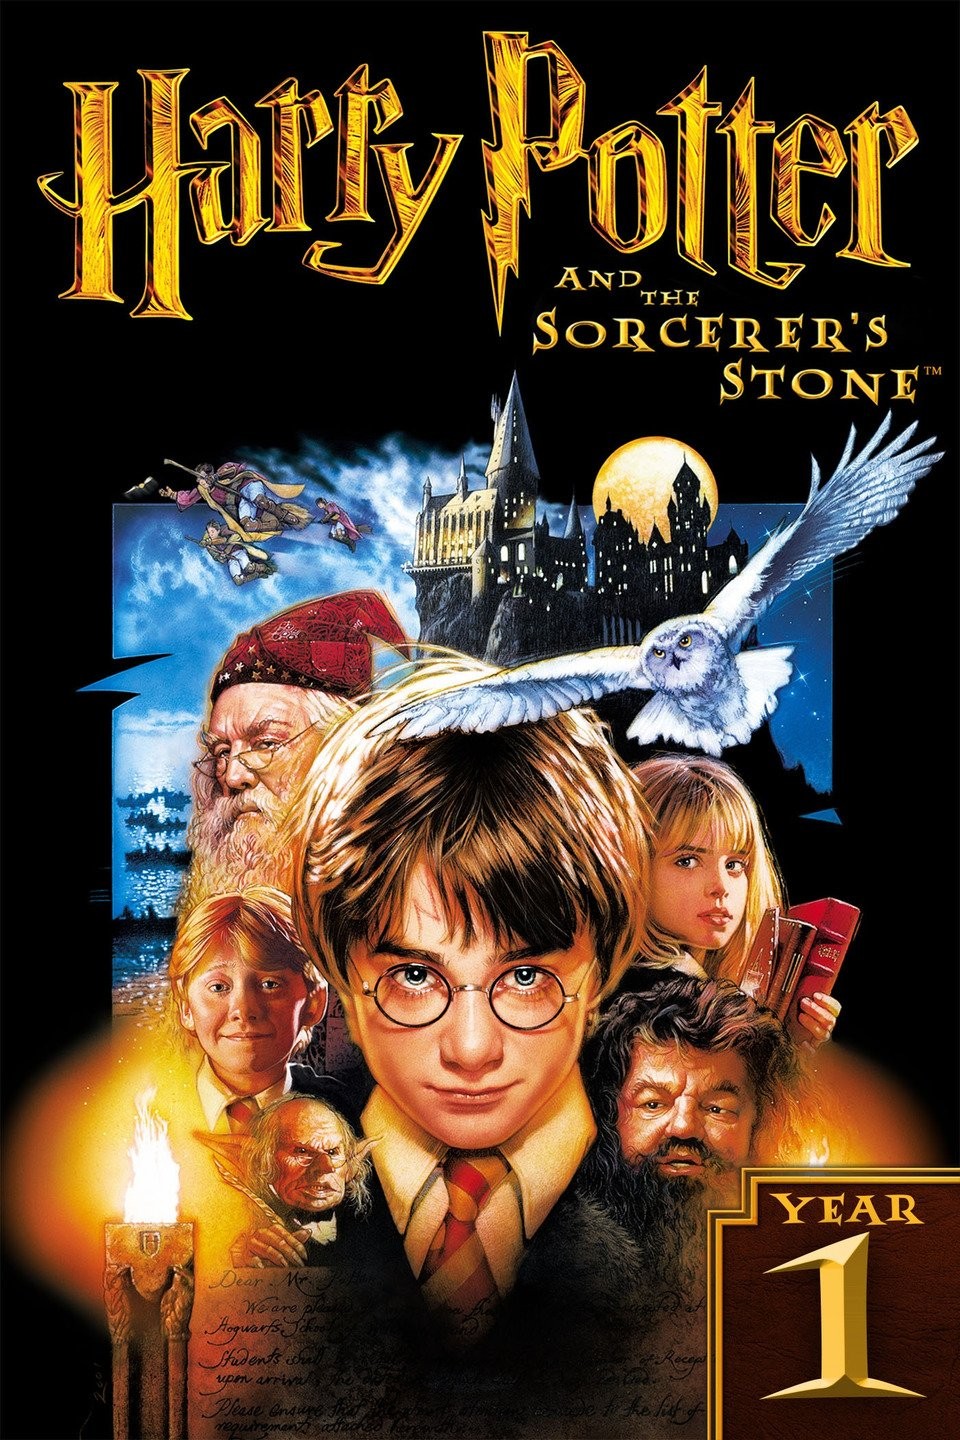 Harry Potter - Tome 1 : Harry Potter and the philosopher's stone